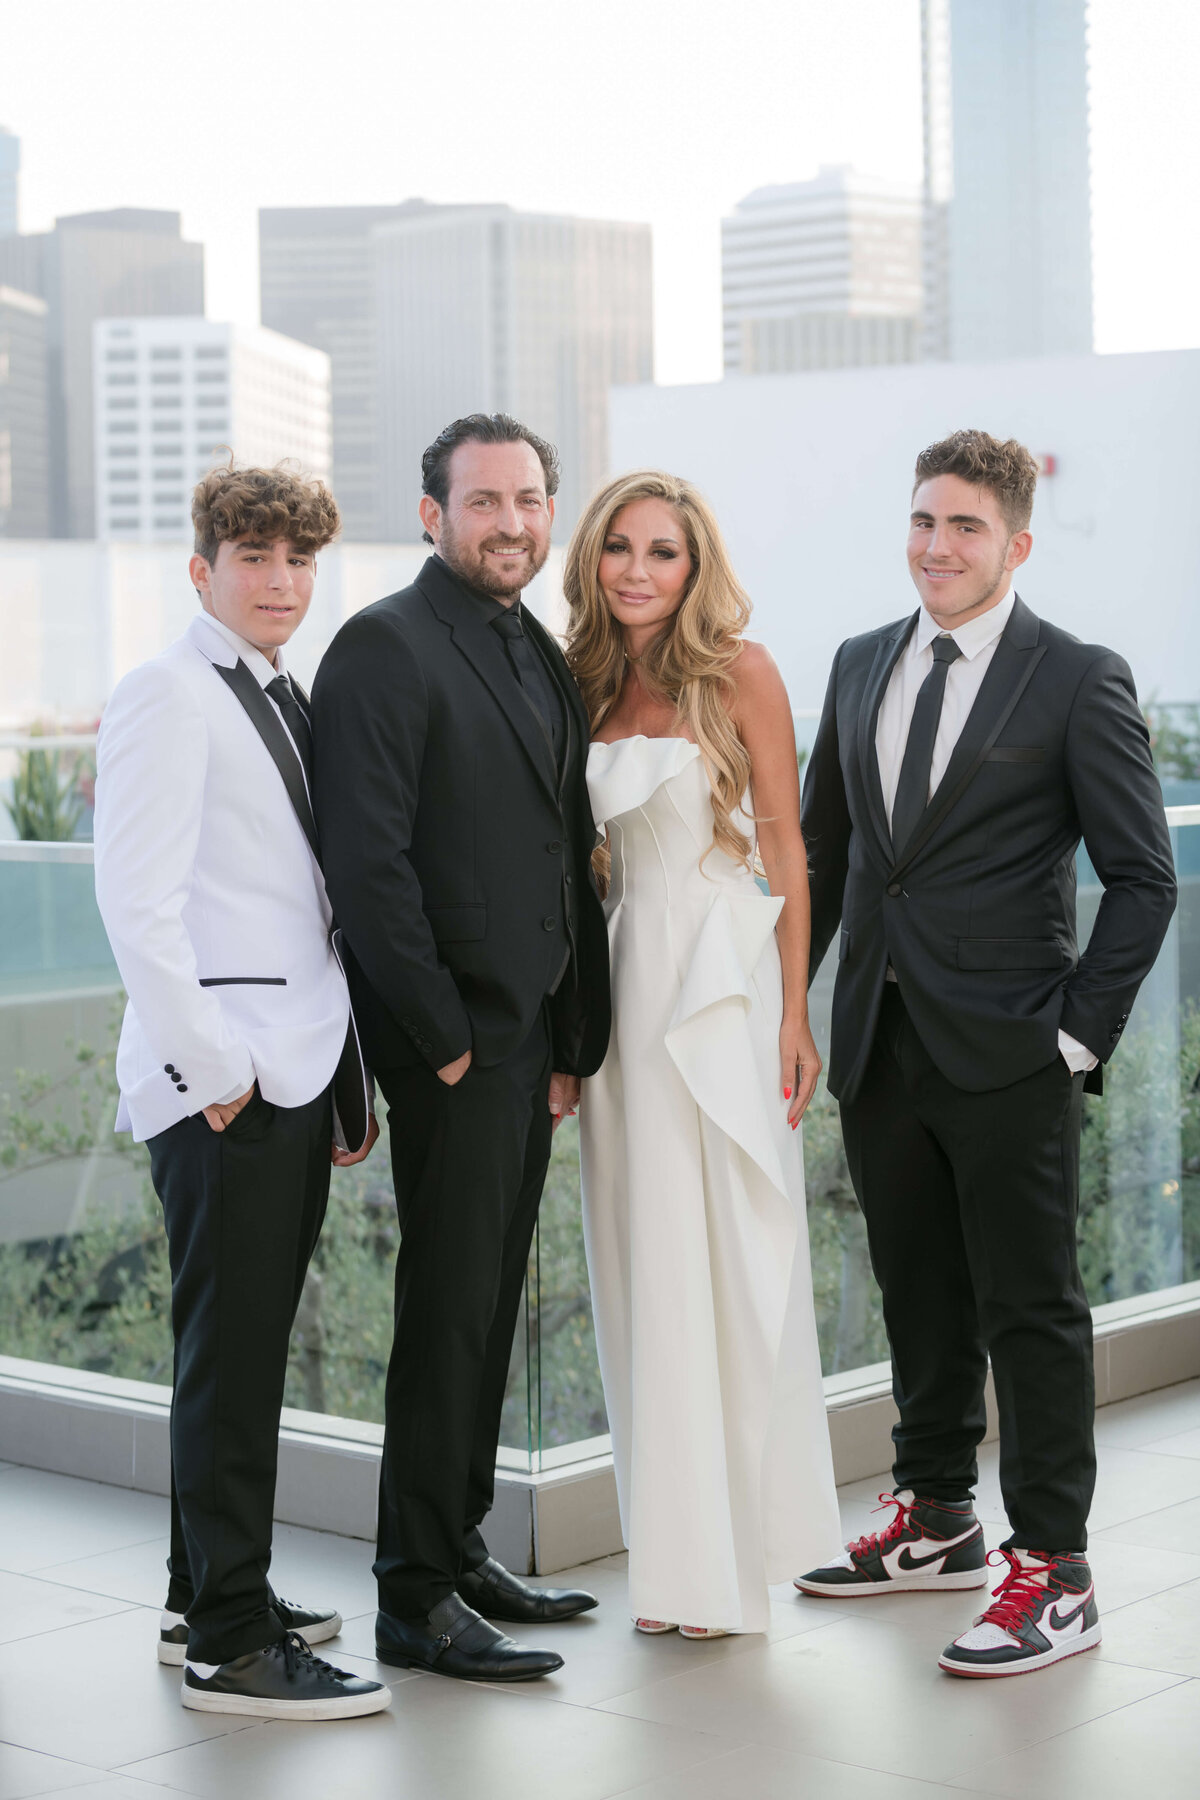 Family pictures for a Beverly Hills Bat Mitzvah